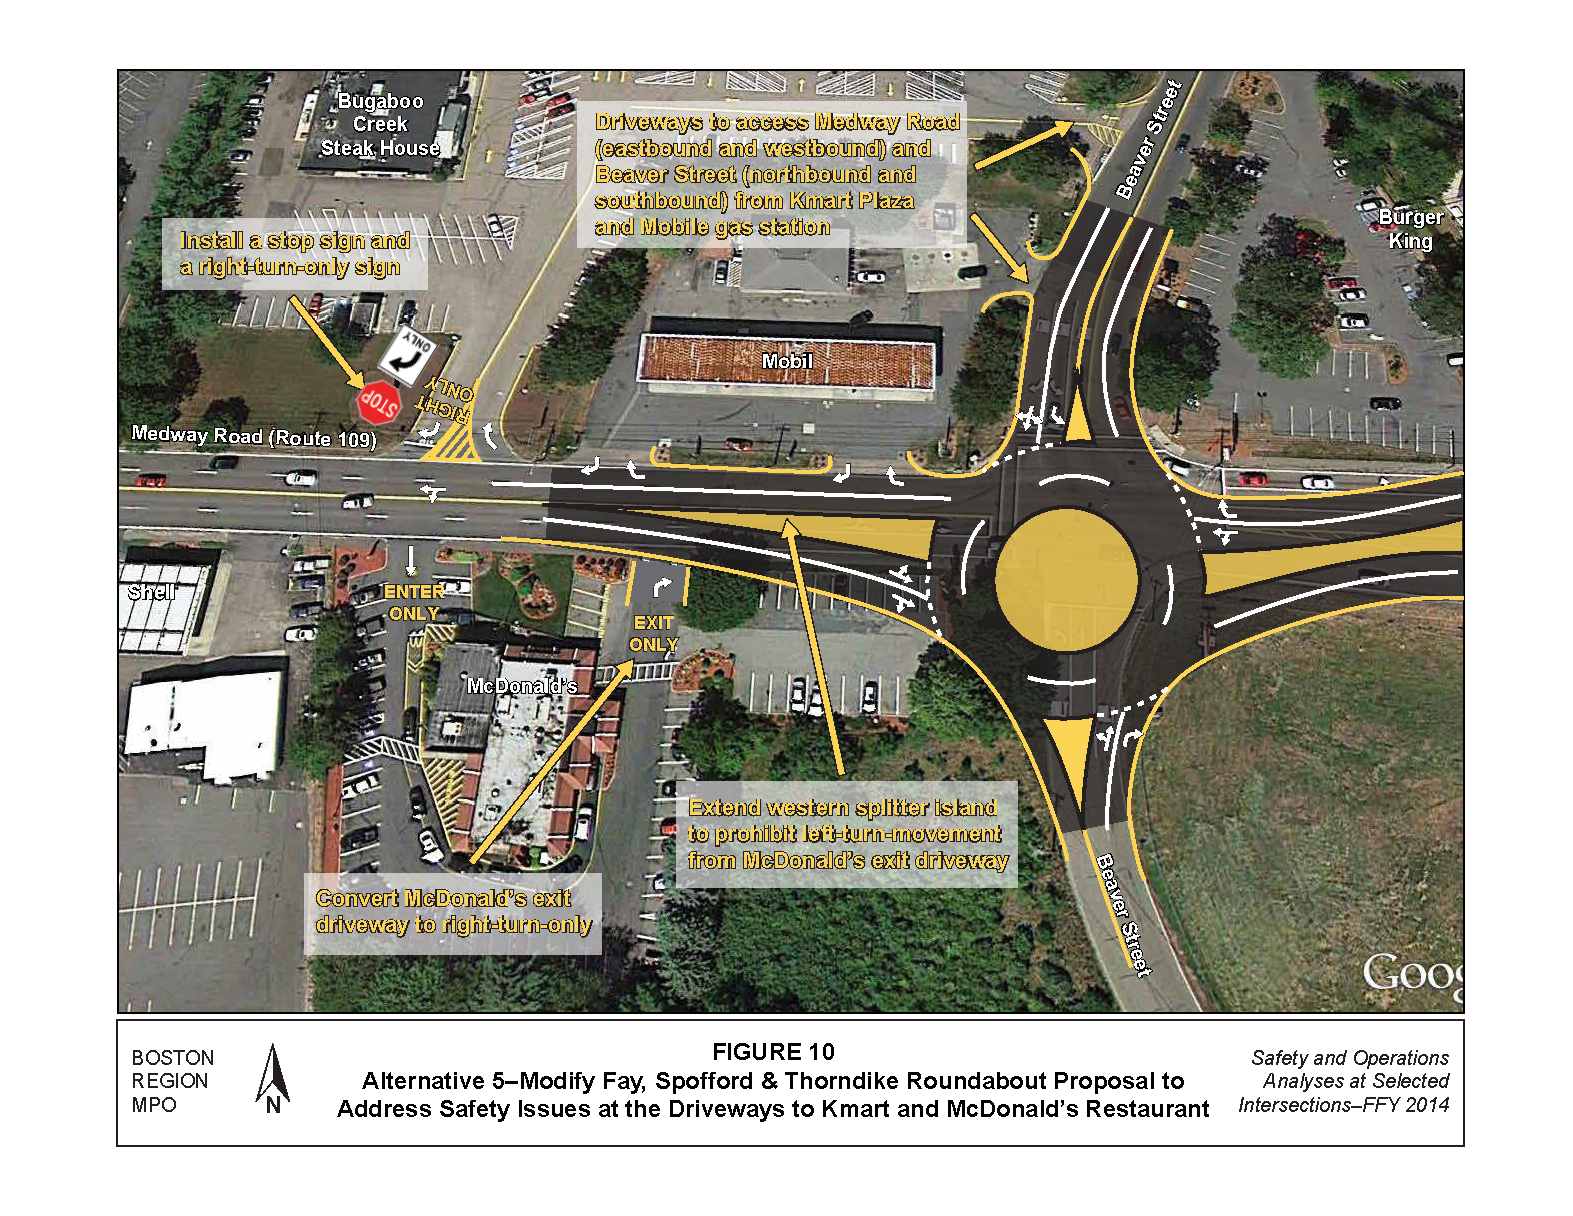 FIGURE 10. Aerial-view map that portrays MPO staff “Improvement Alternative 5,” which recommends constructing a roundabout to address safety issues at the driveways of Kmart and McDonald’s.